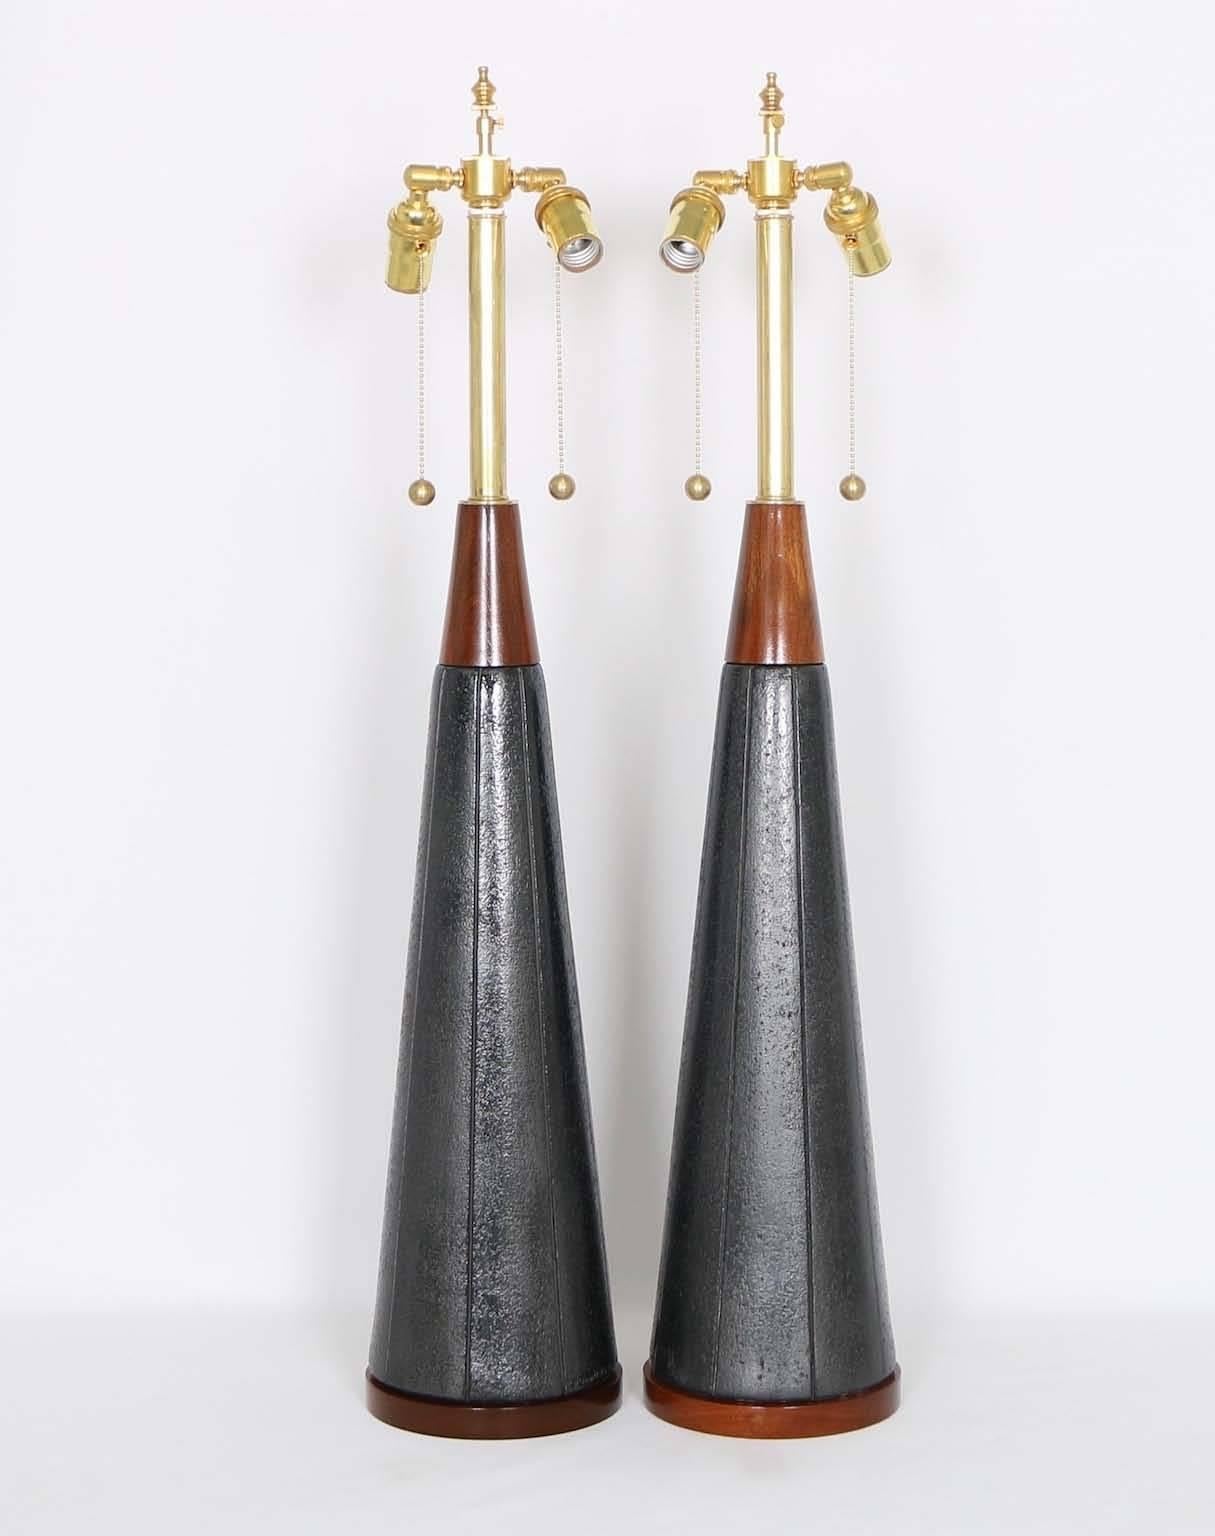 A pair of Mid-Century Modern table lamps, produced in the United States by Quartite Creative, of conical form in black-ash colored mottled ceramic with walnut accents. Marked and dated 1953 on the back of the ceramic body. The noted height is to the